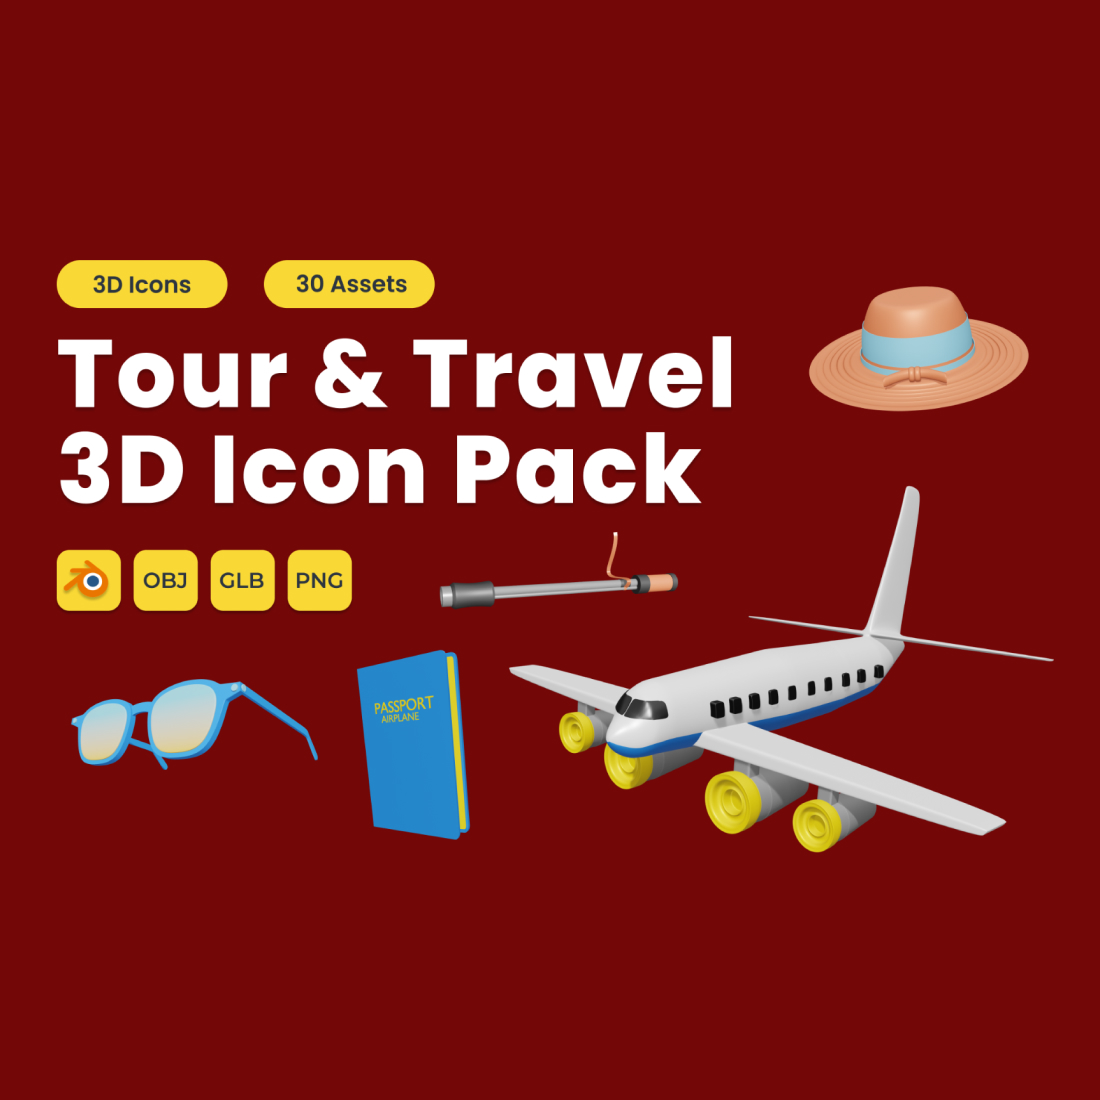 Tour and Travel 3D Icon Pack Vol 1 preview image.